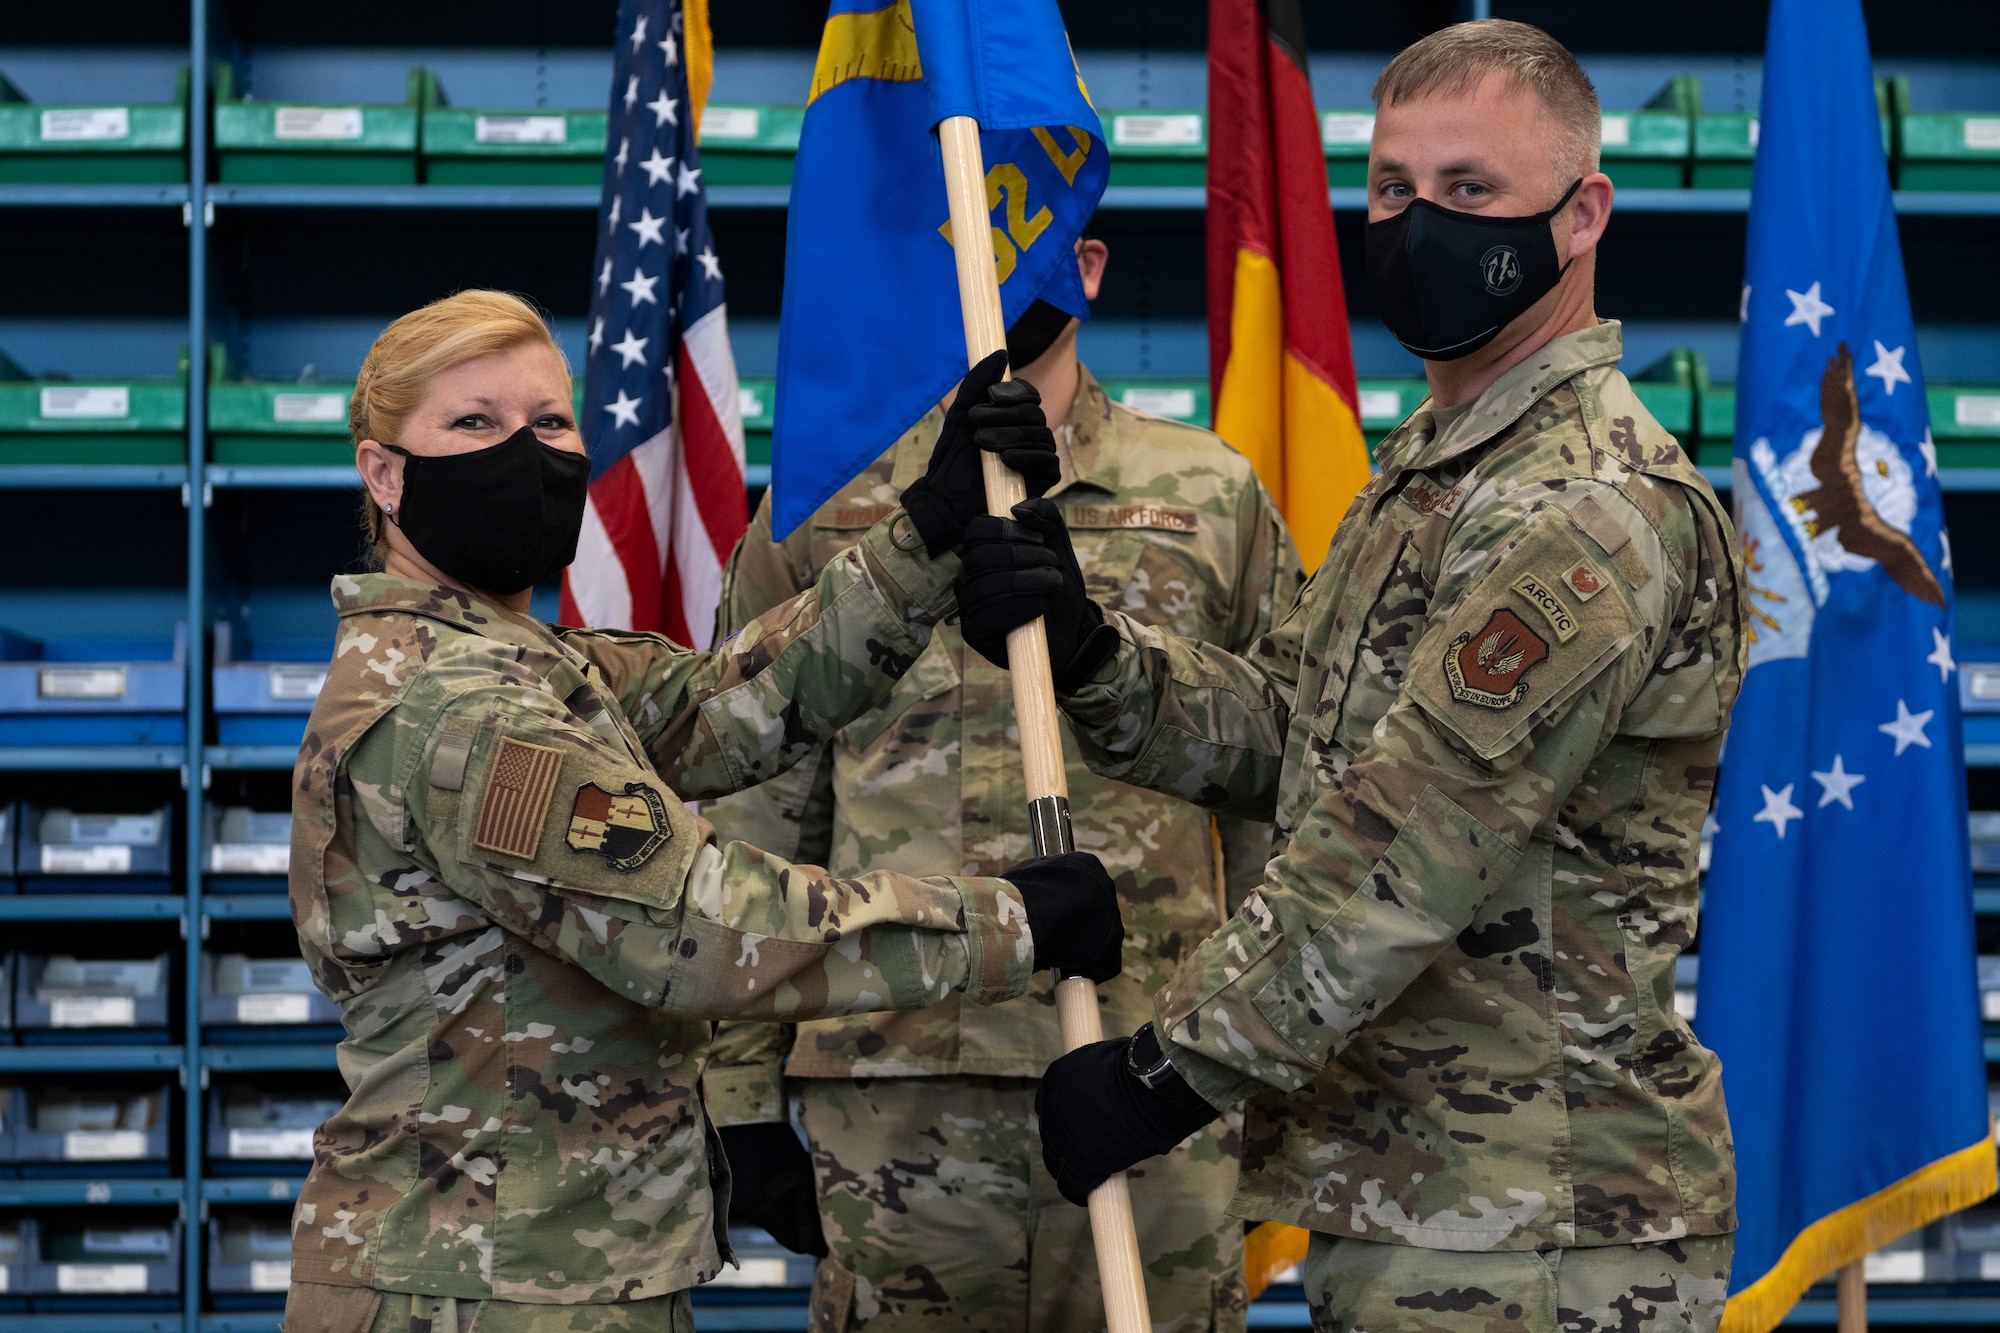 U.S. Air Force Col. Betsy Ross, 52nd Mission Support Group commander (left), passes the 52nd Logistics Readiness Squadron guidon to U.S. Air Force Maj. Donnie Horne, the 52nd LRS commander, during the 52nd LRS change of command ceremony.